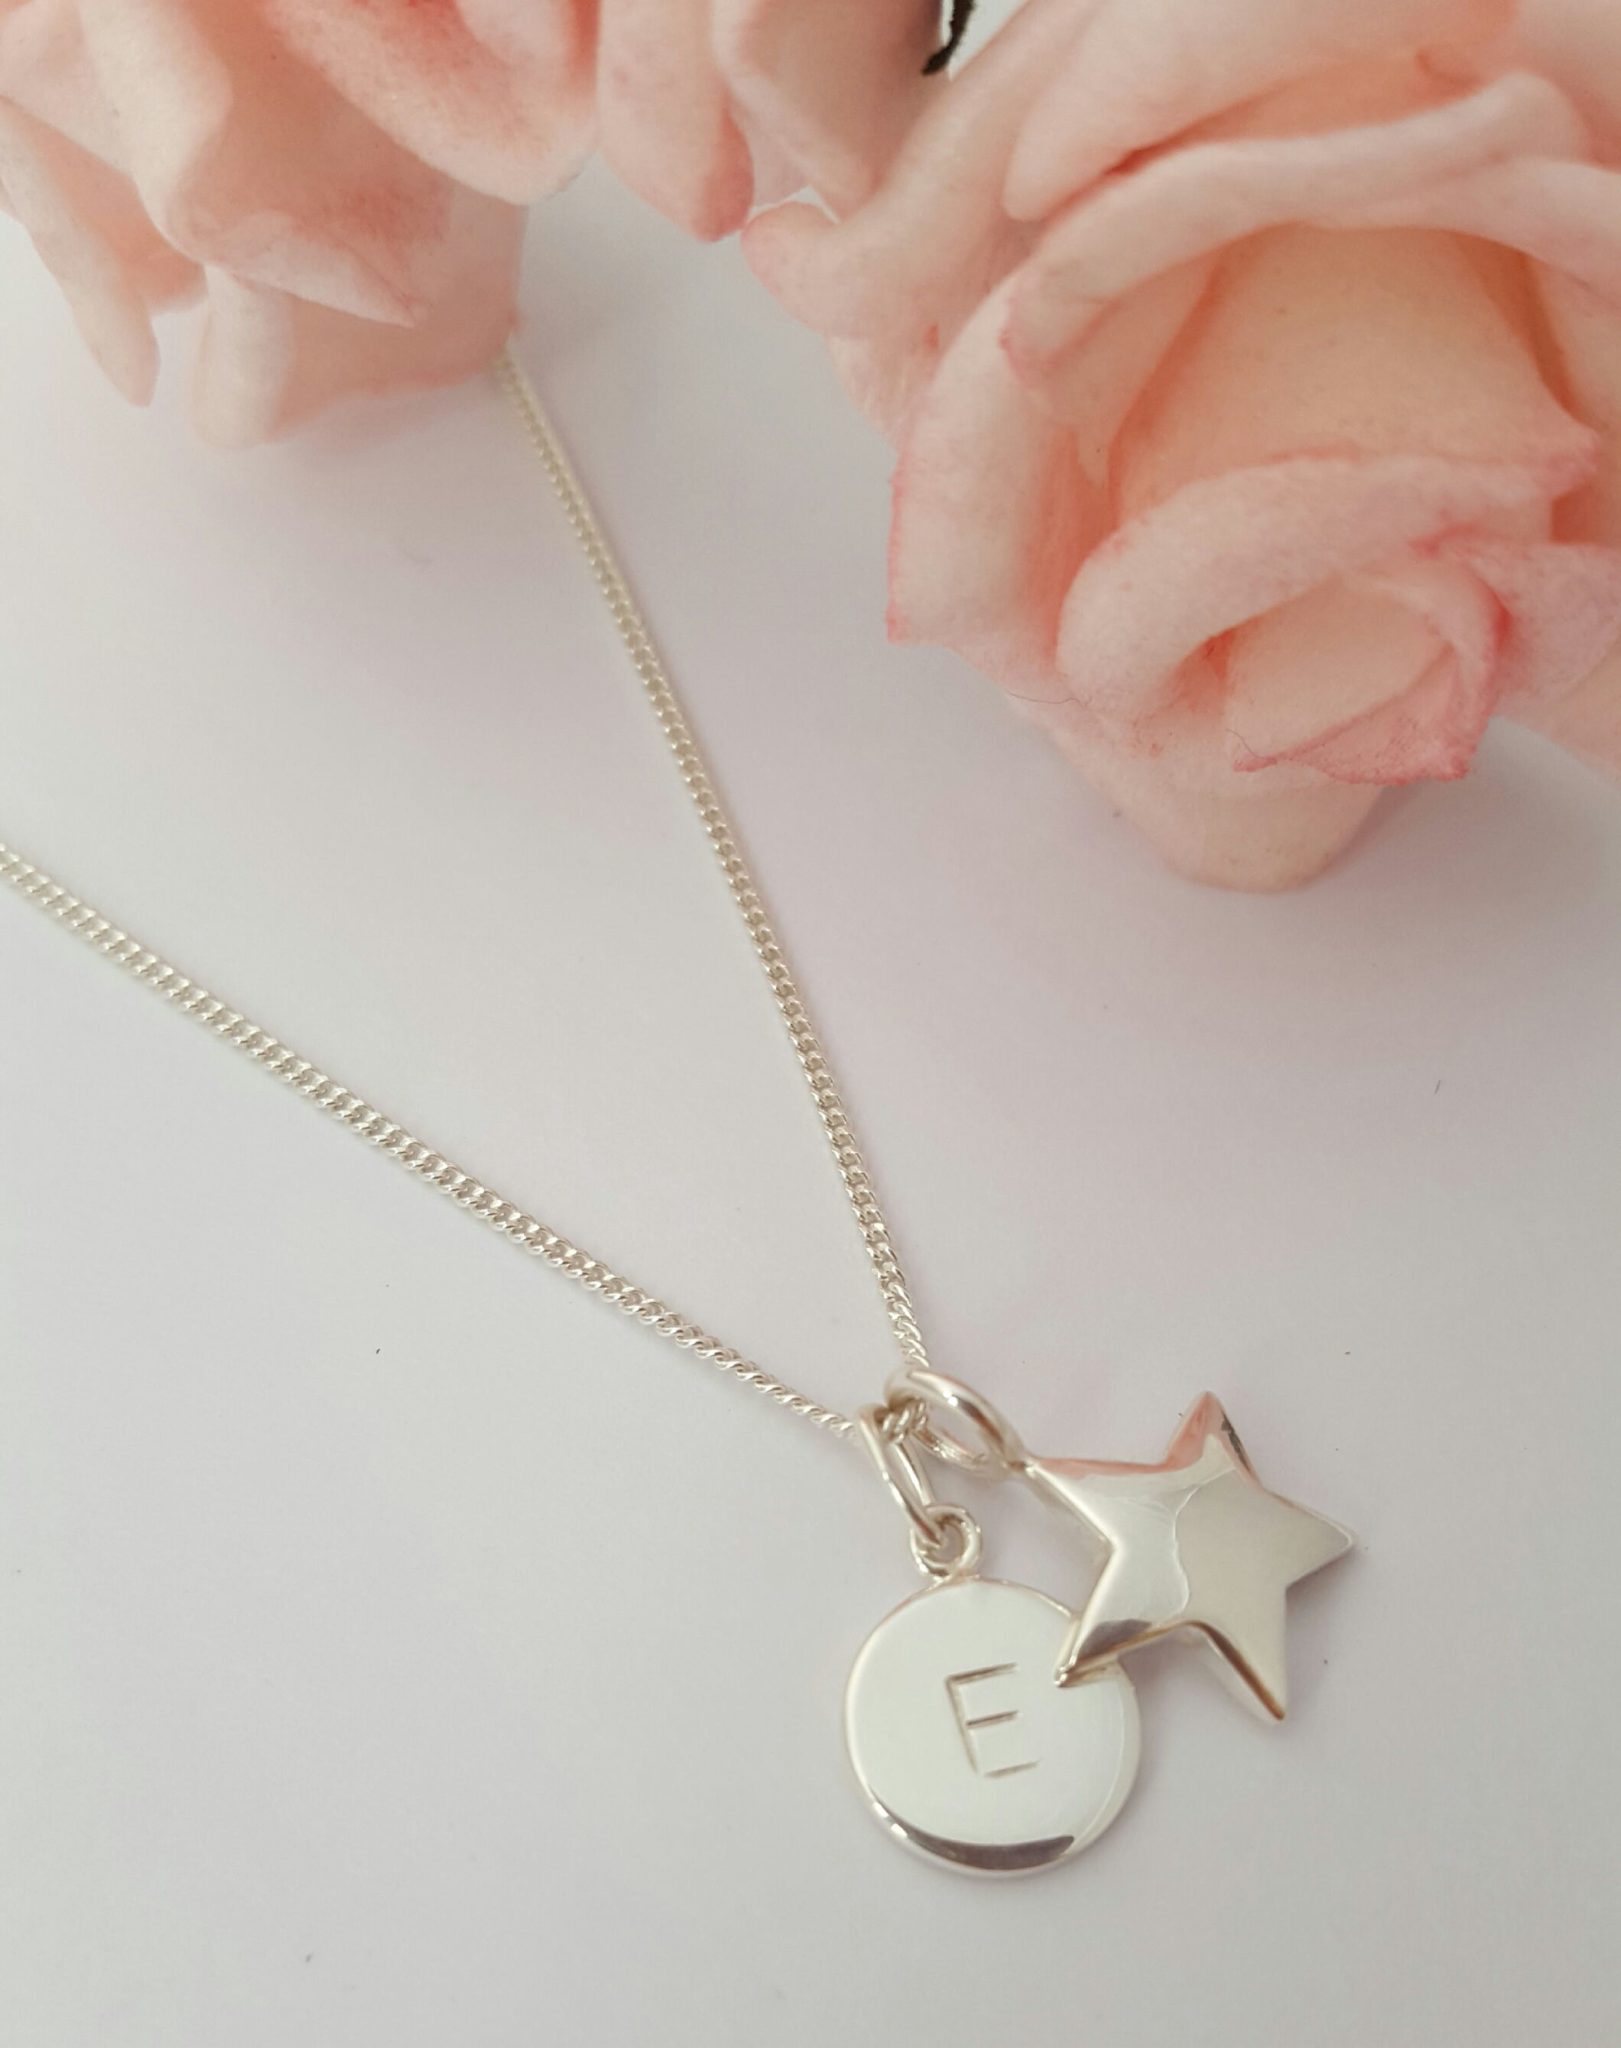 Star initial necklace